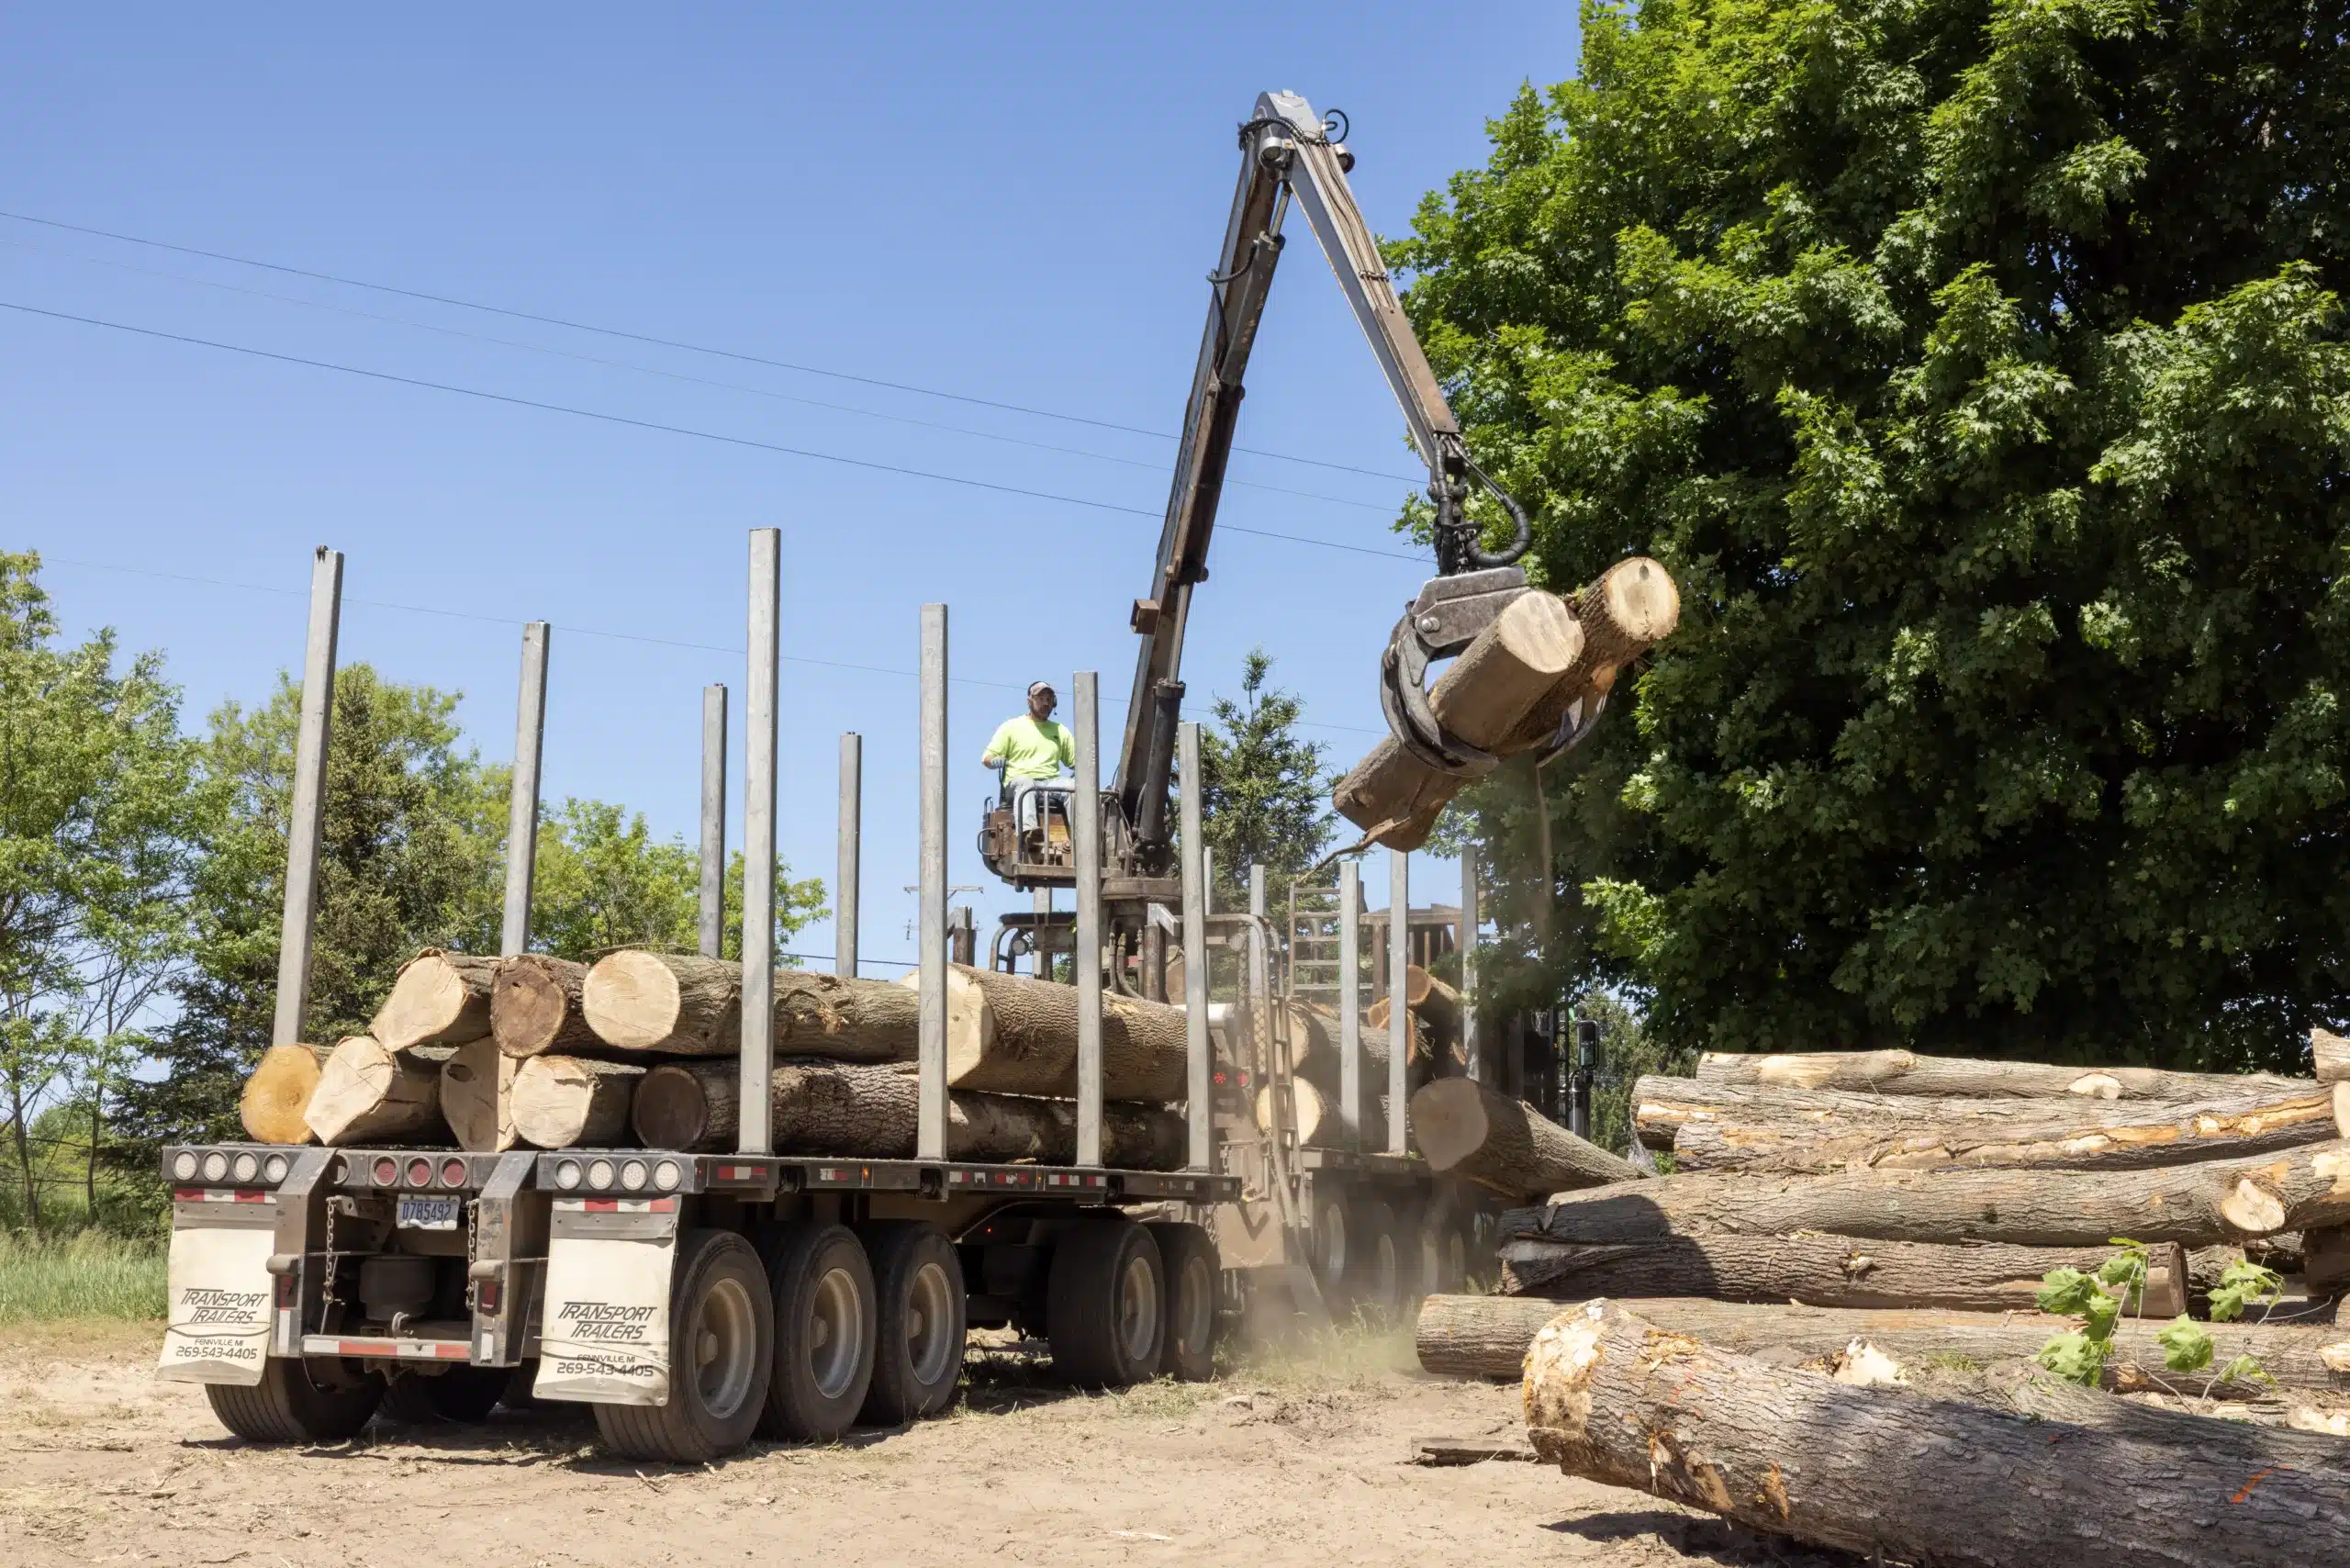 A Buskirk Lumber employee-operated log loader truck lifts two timber logs onto its flatbed trailer.